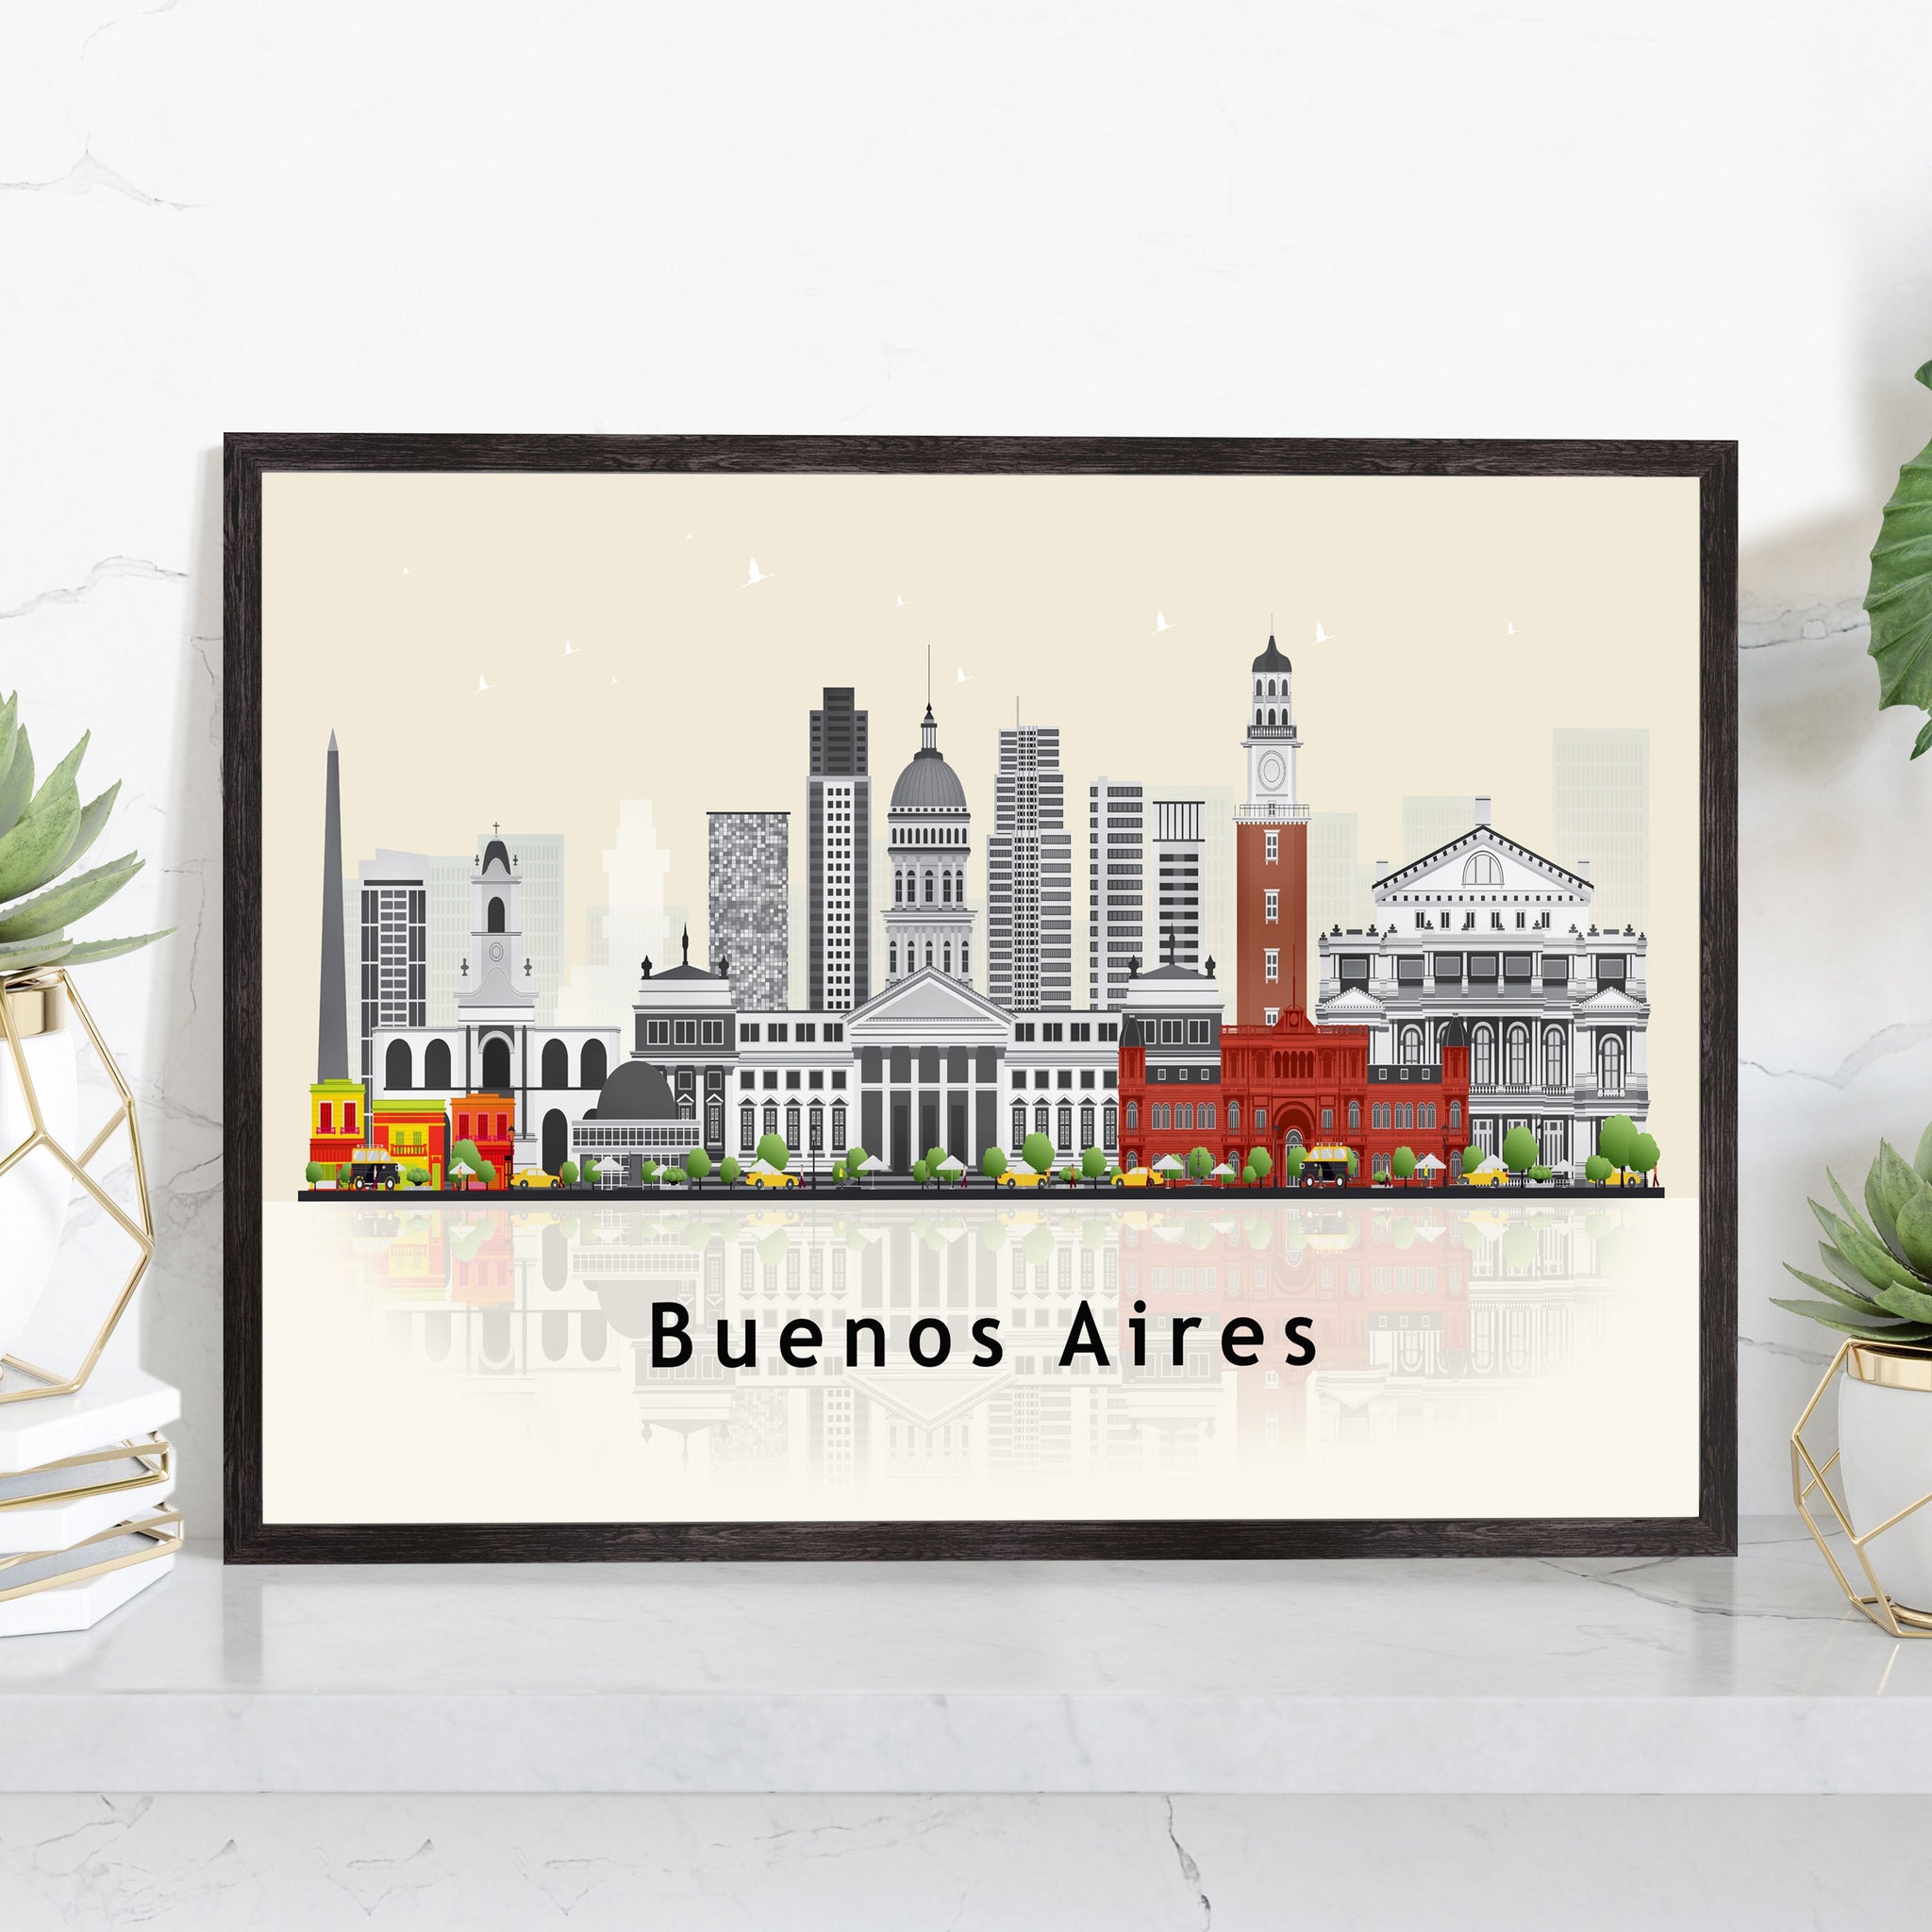 BUENOS AIRES Illustration skyline poster, Modern skyline cityscape poster, Argentina city skyline landmark map poster, Home wall decoration